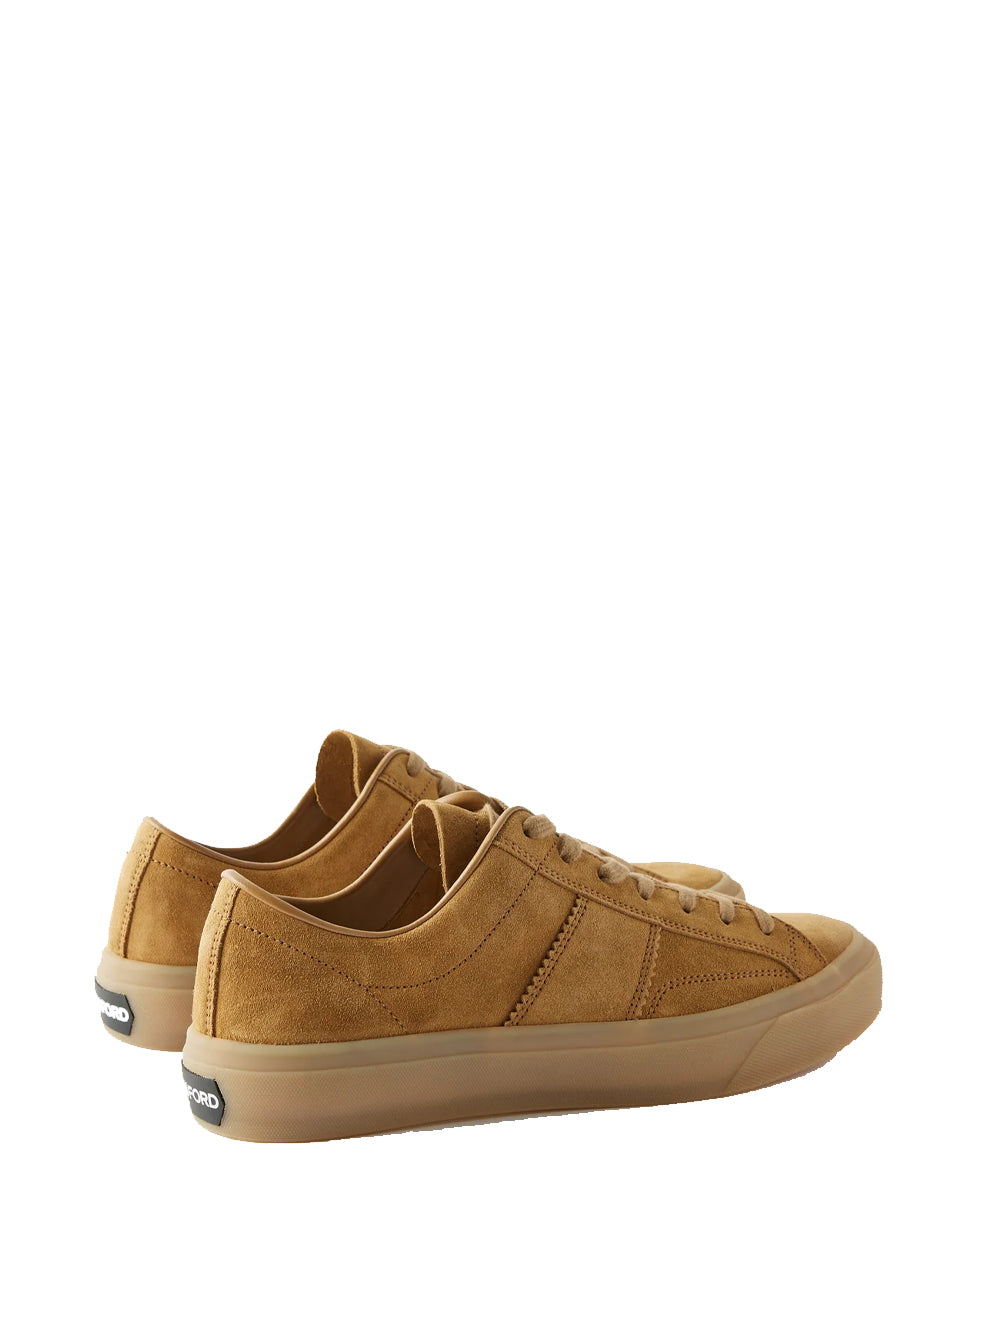 TOM FORD Cambridge Suede Sneakers Low-Top Trainers Brown - MAISONDEFASHION.COM